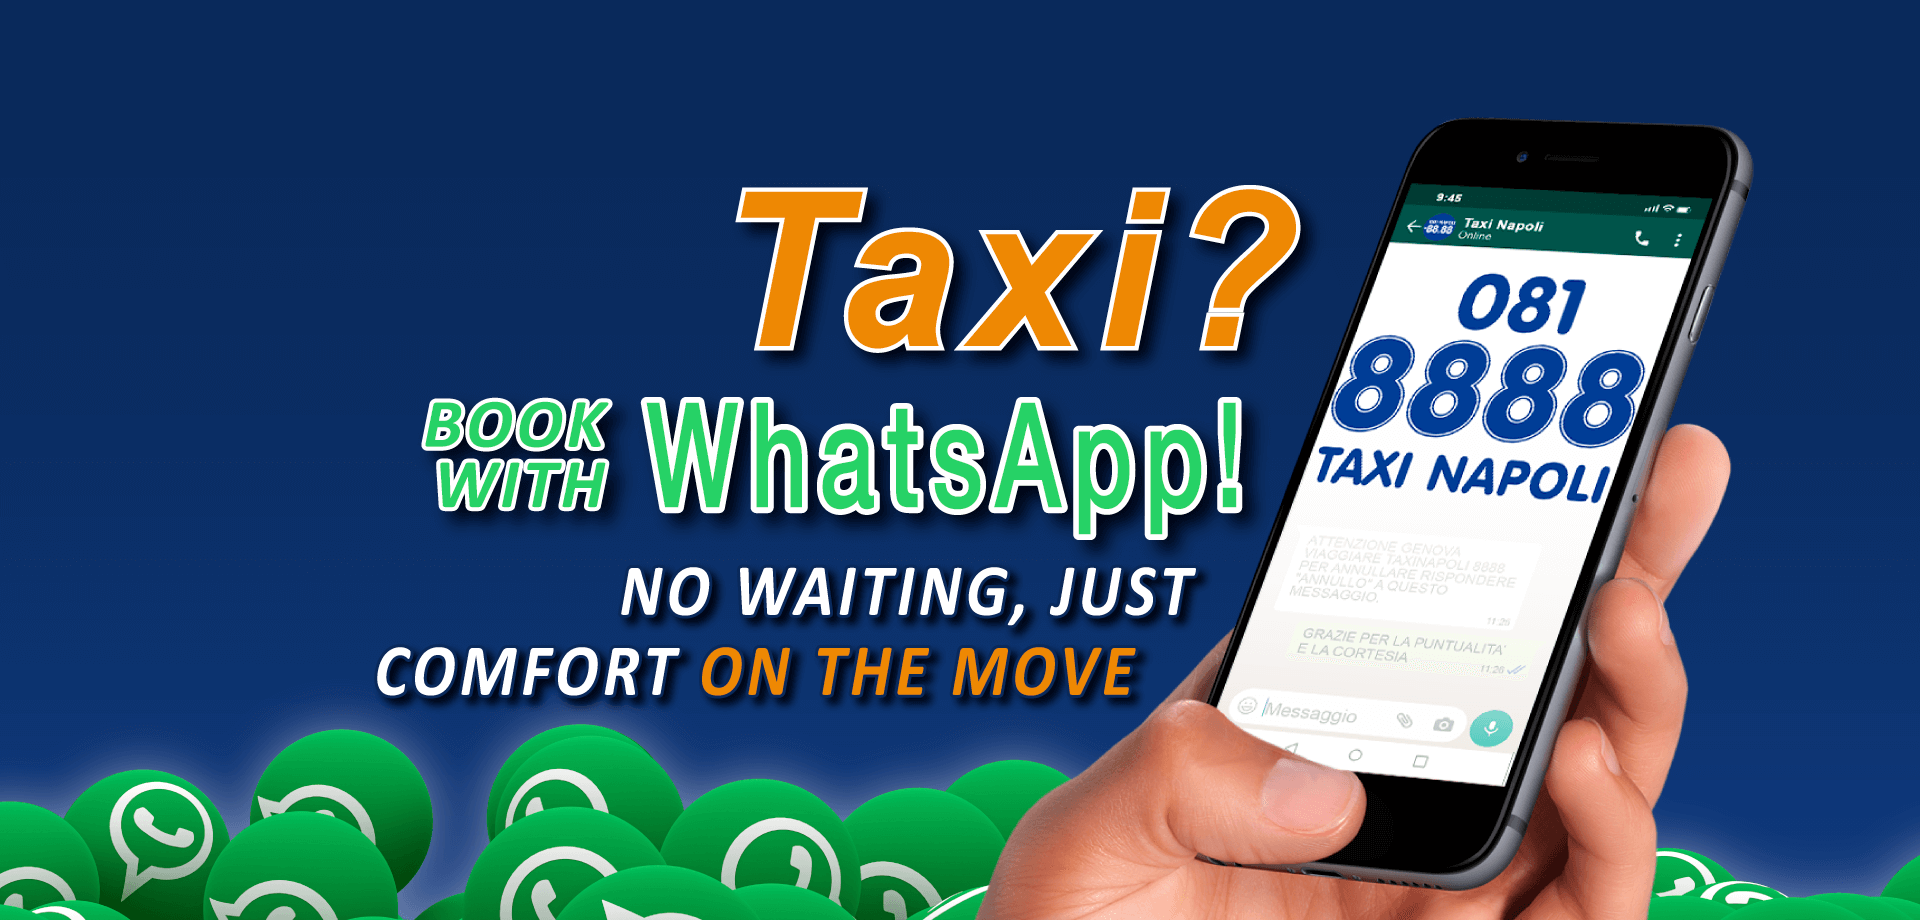 BOOK WITH WhatsApp! NO WAITING, JUST COMFORT ON THE MOVE